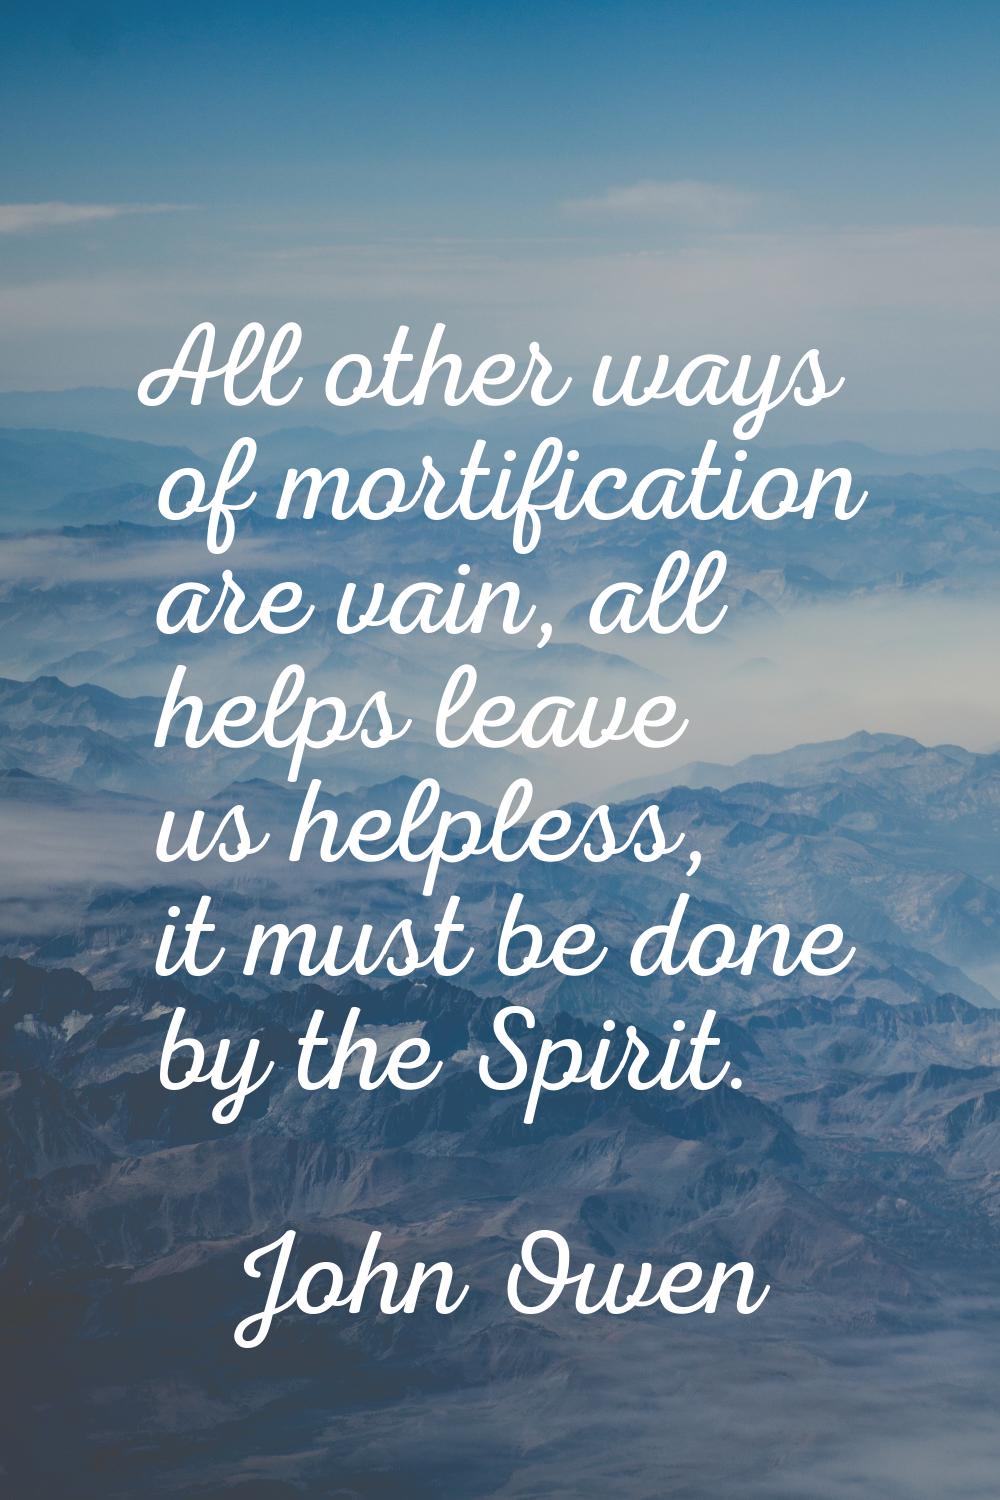 All other ways of mortification are vain, all helps leave us helpless, it must be done by the Spiri